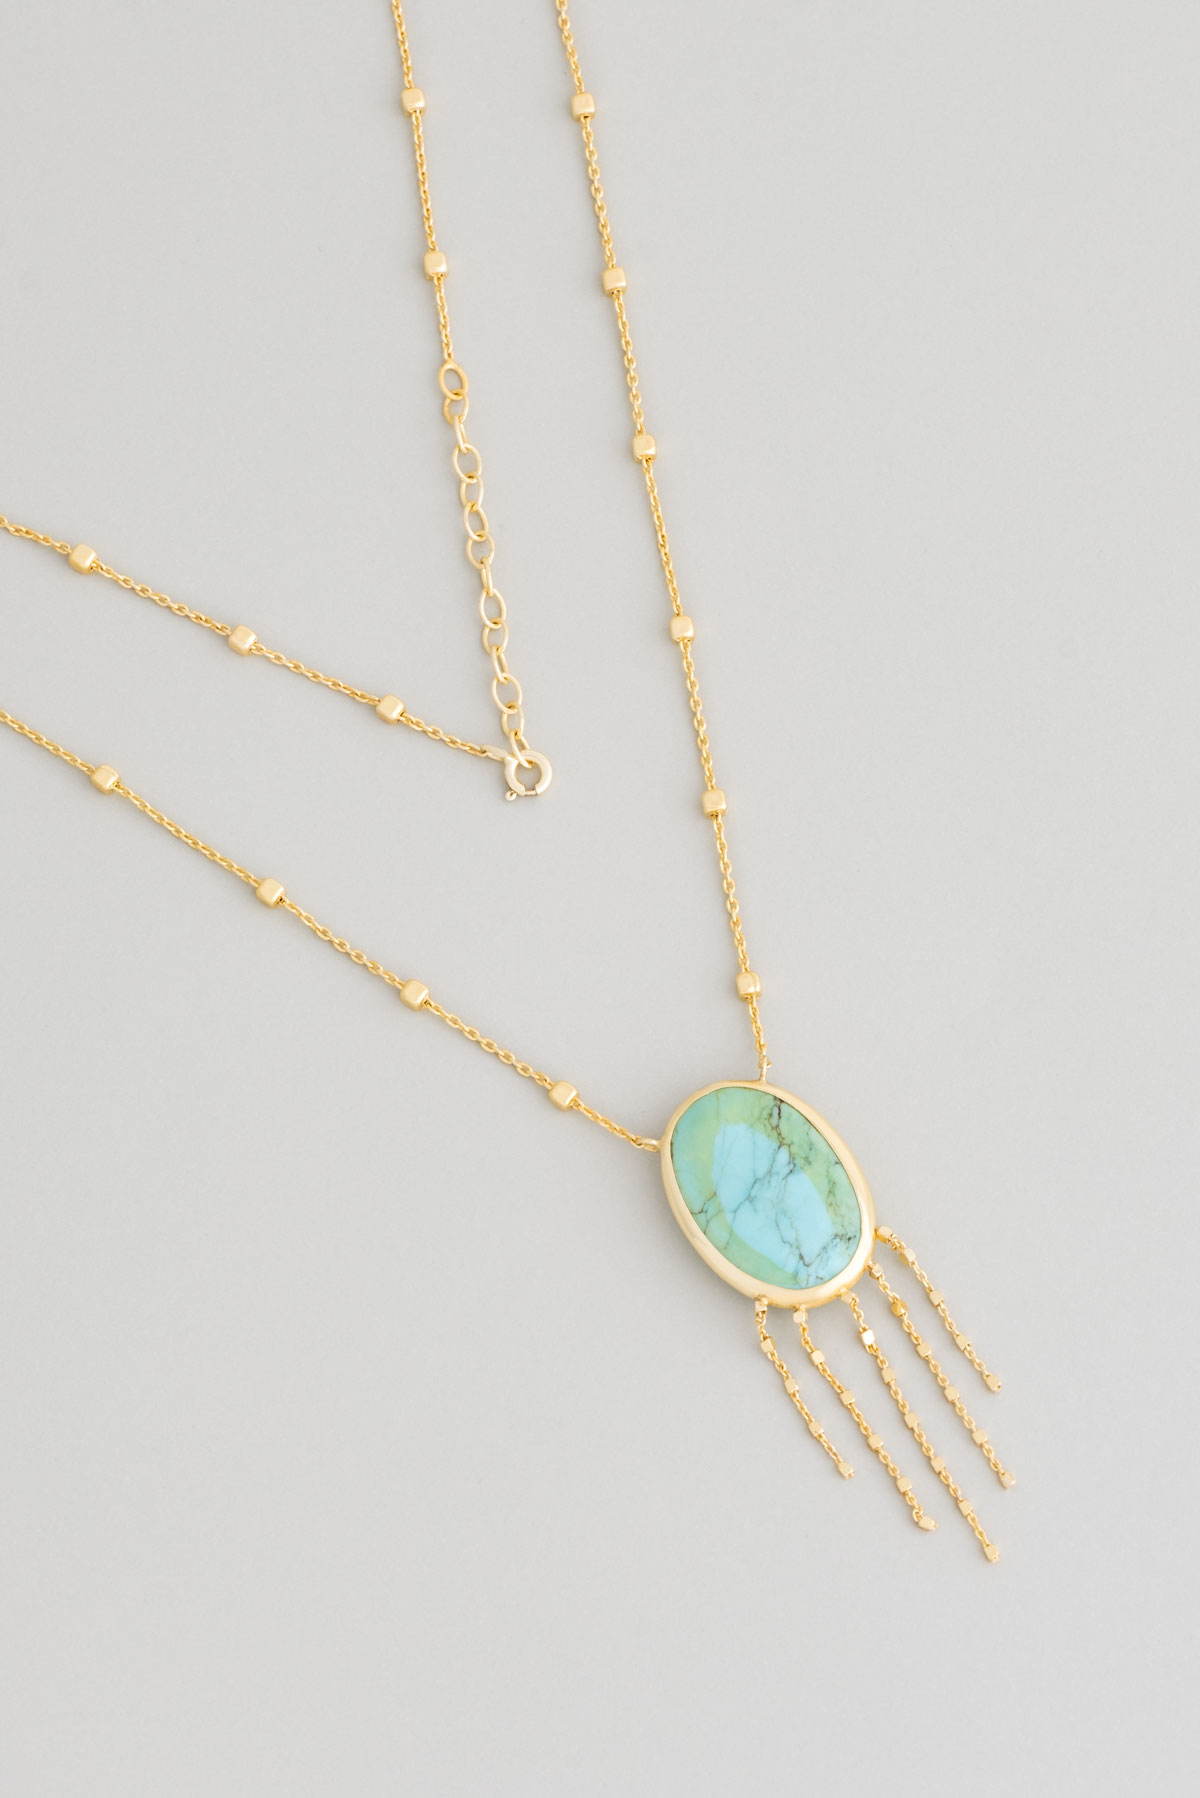 Mystic 18 Karat Yellow Gold Plated Silver Turquoise Stone Necklace